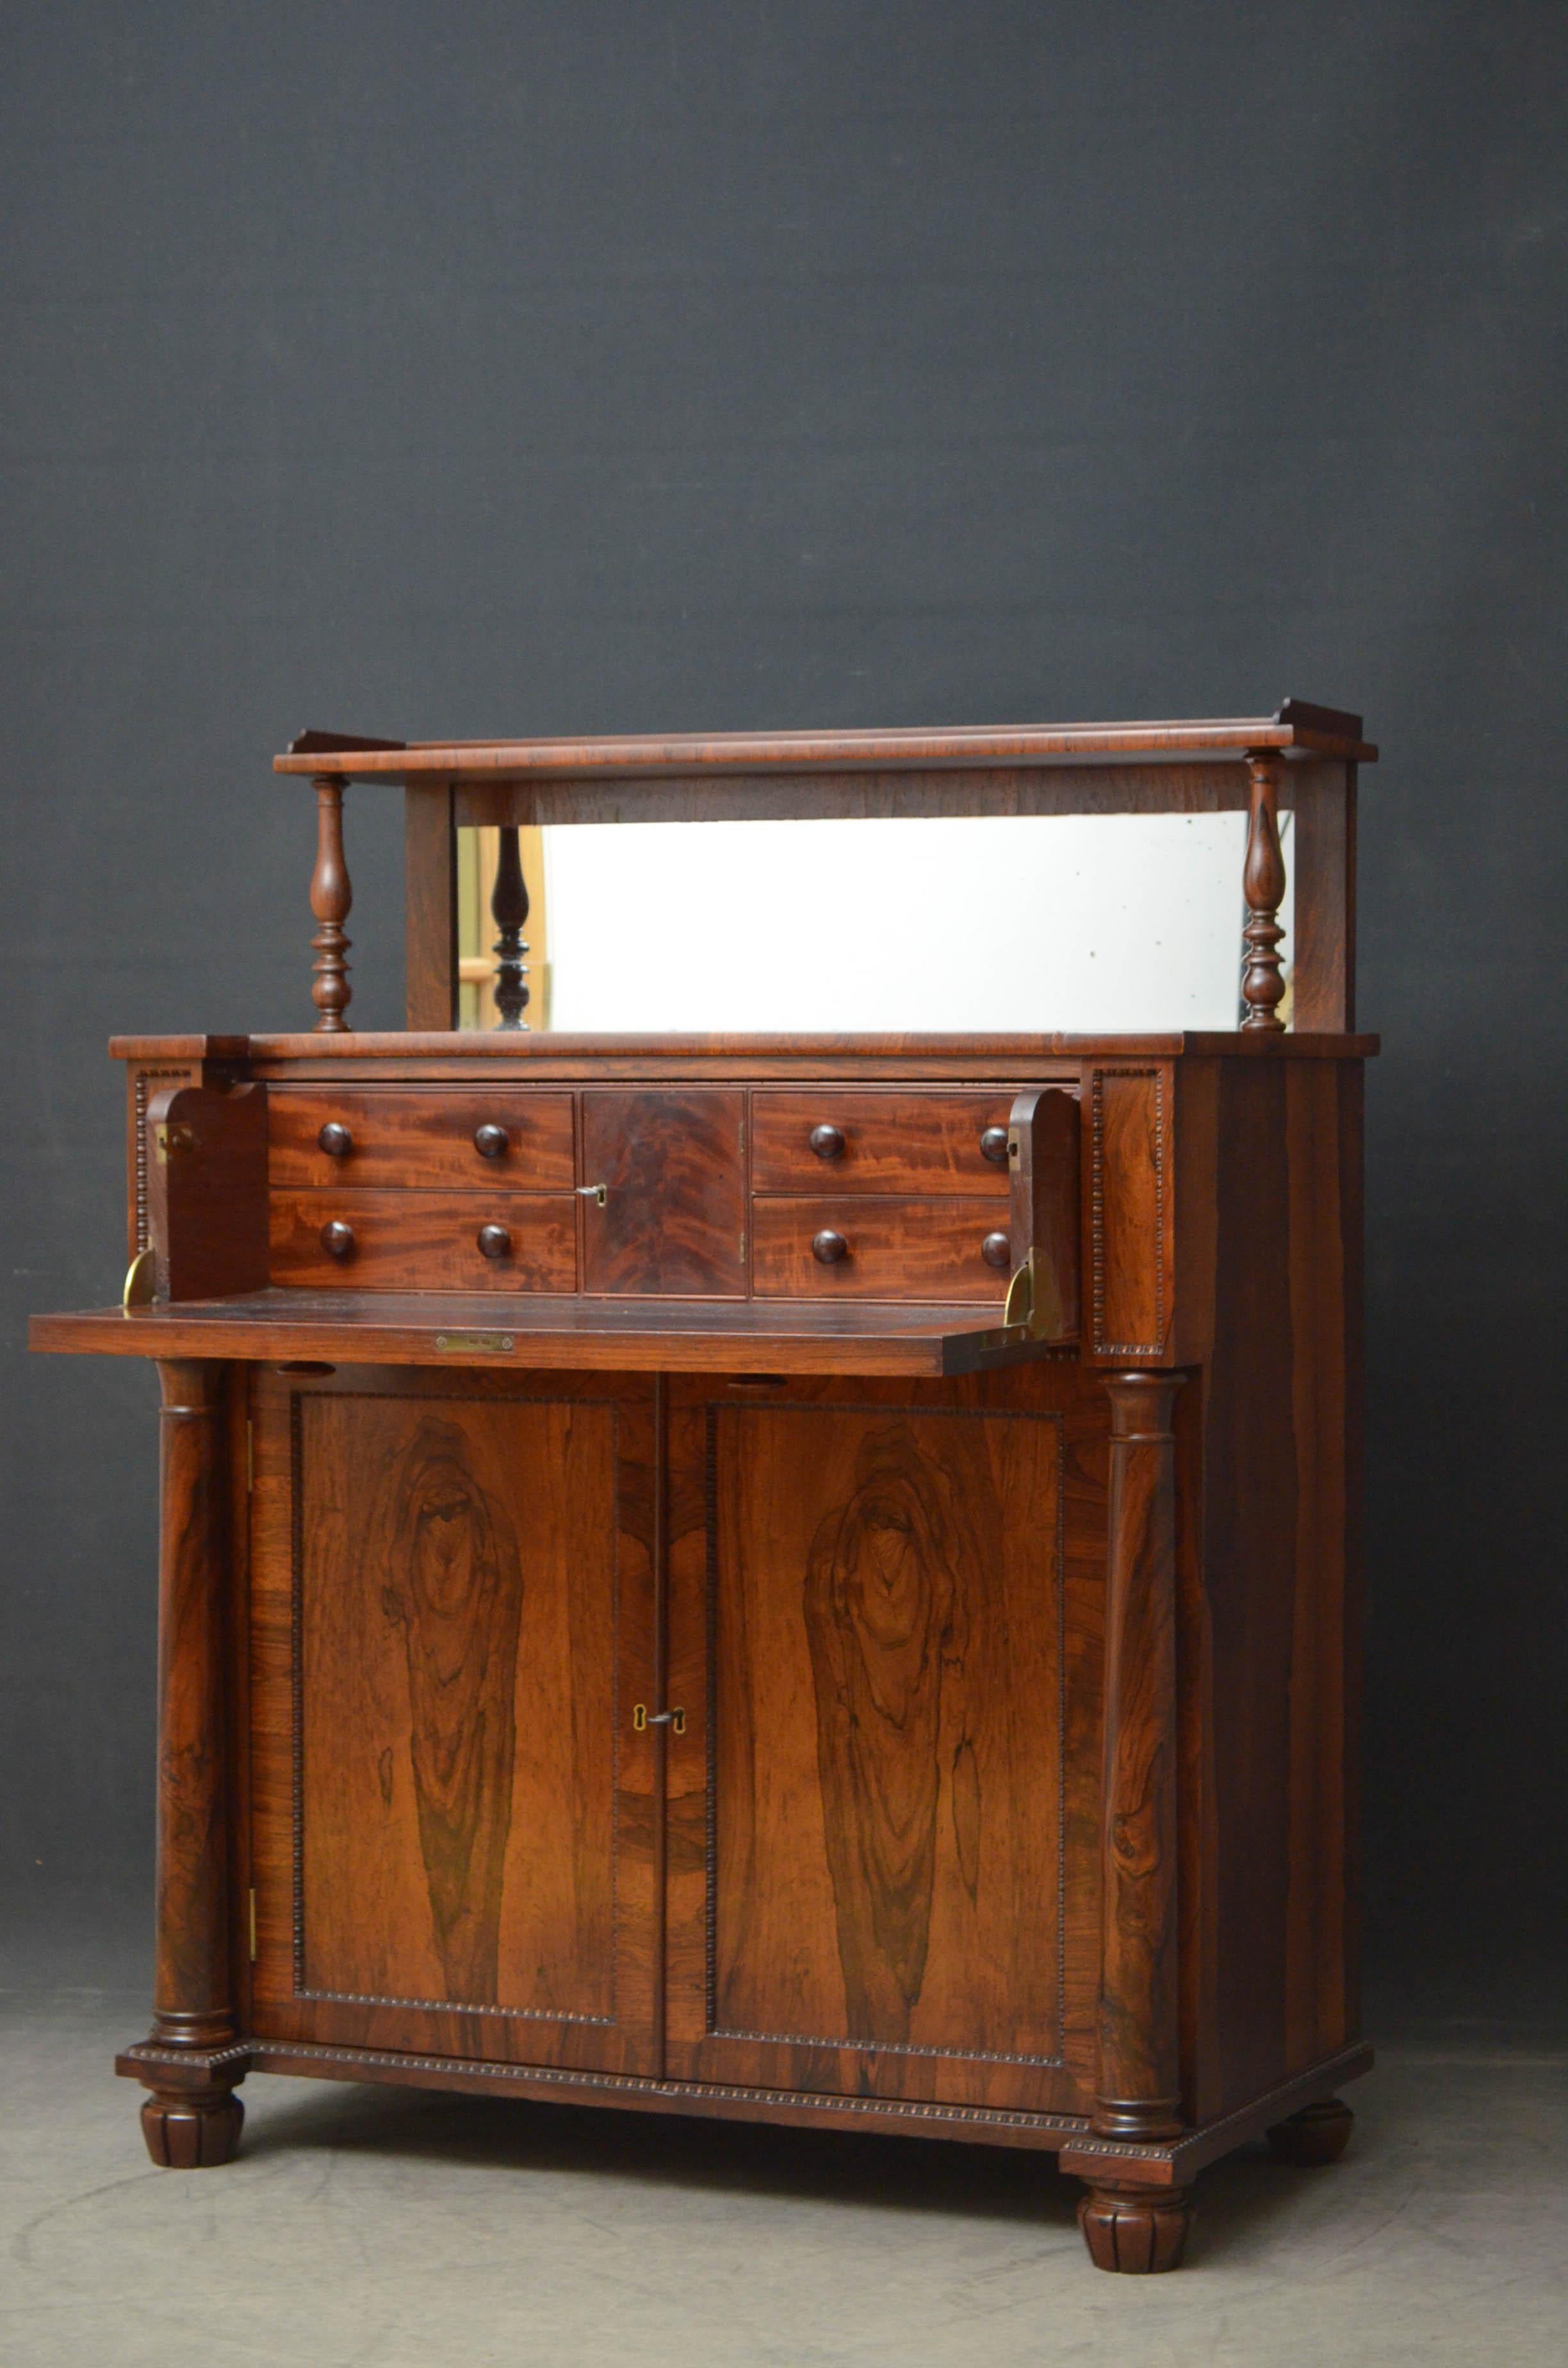 Sn4726 superb Regency chiffonier in rosewood in the manner of Gillows, having mirrored upstand to the back and fantastic top above a secretaire section which opens to reveal a cupboard, small drawers and leather writing surface, the base having a